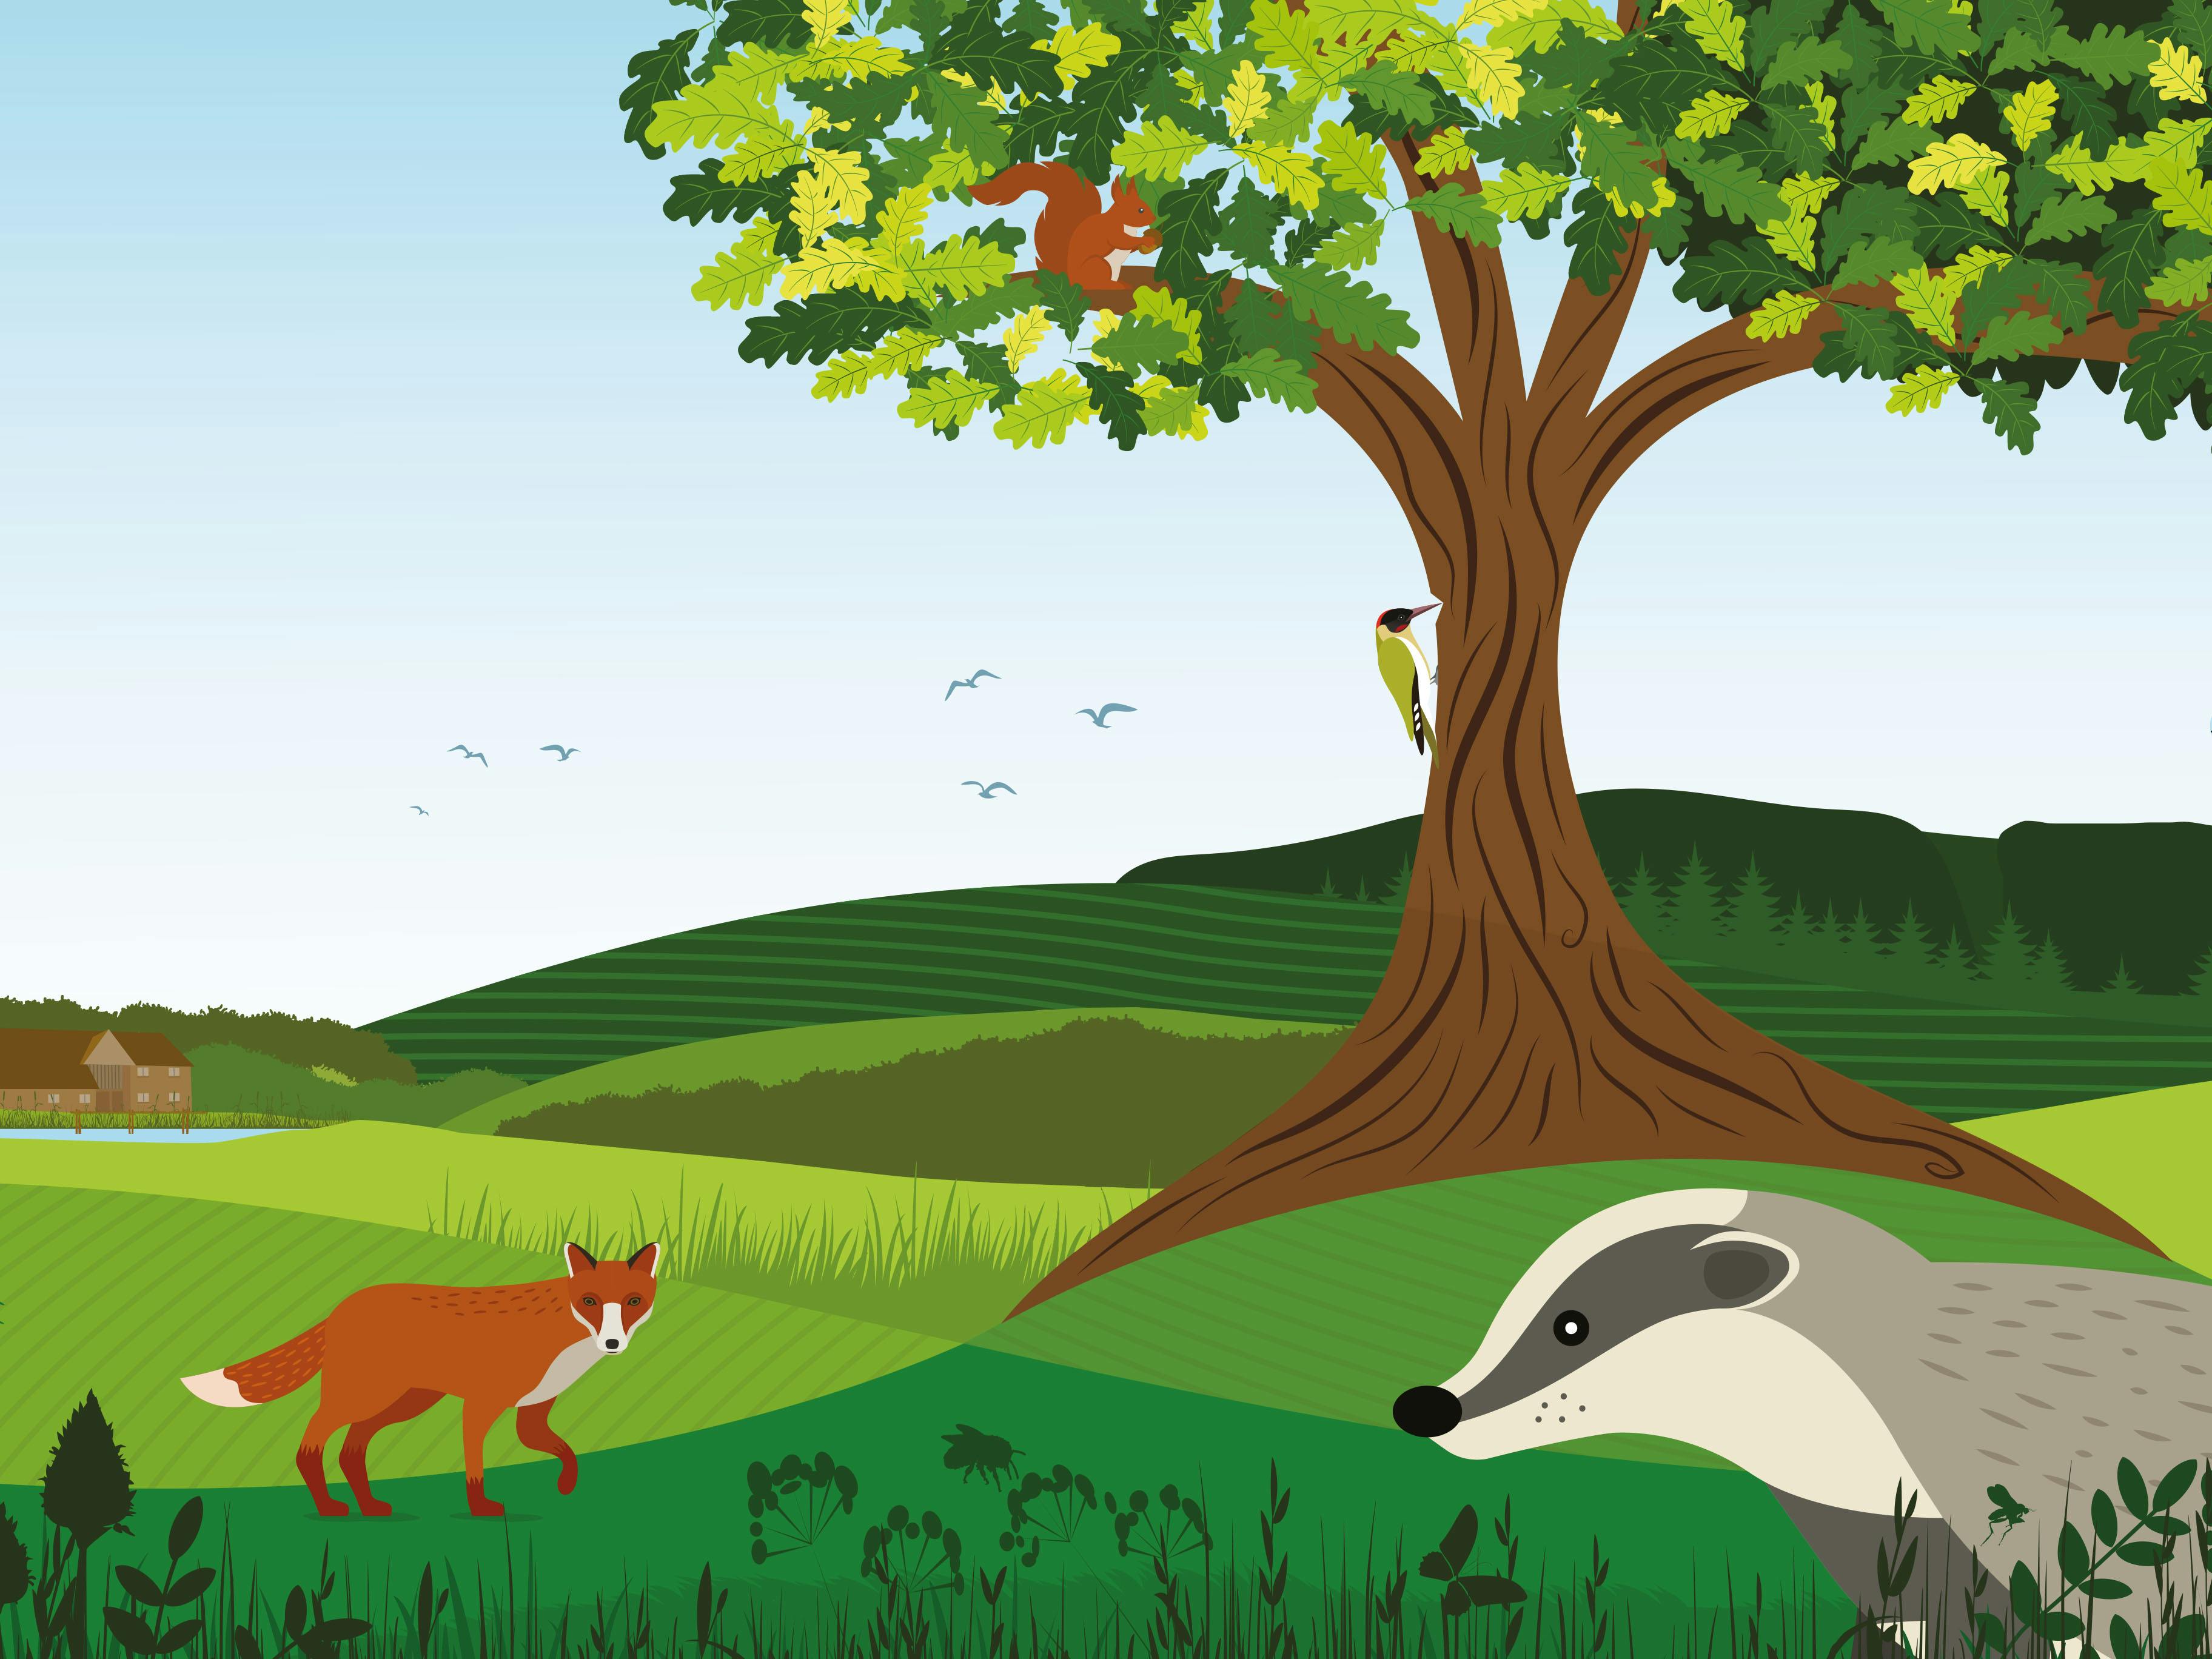 Illustration of a field with a badger, fox standing in a field and a squirrel and woodpecker in a tree.